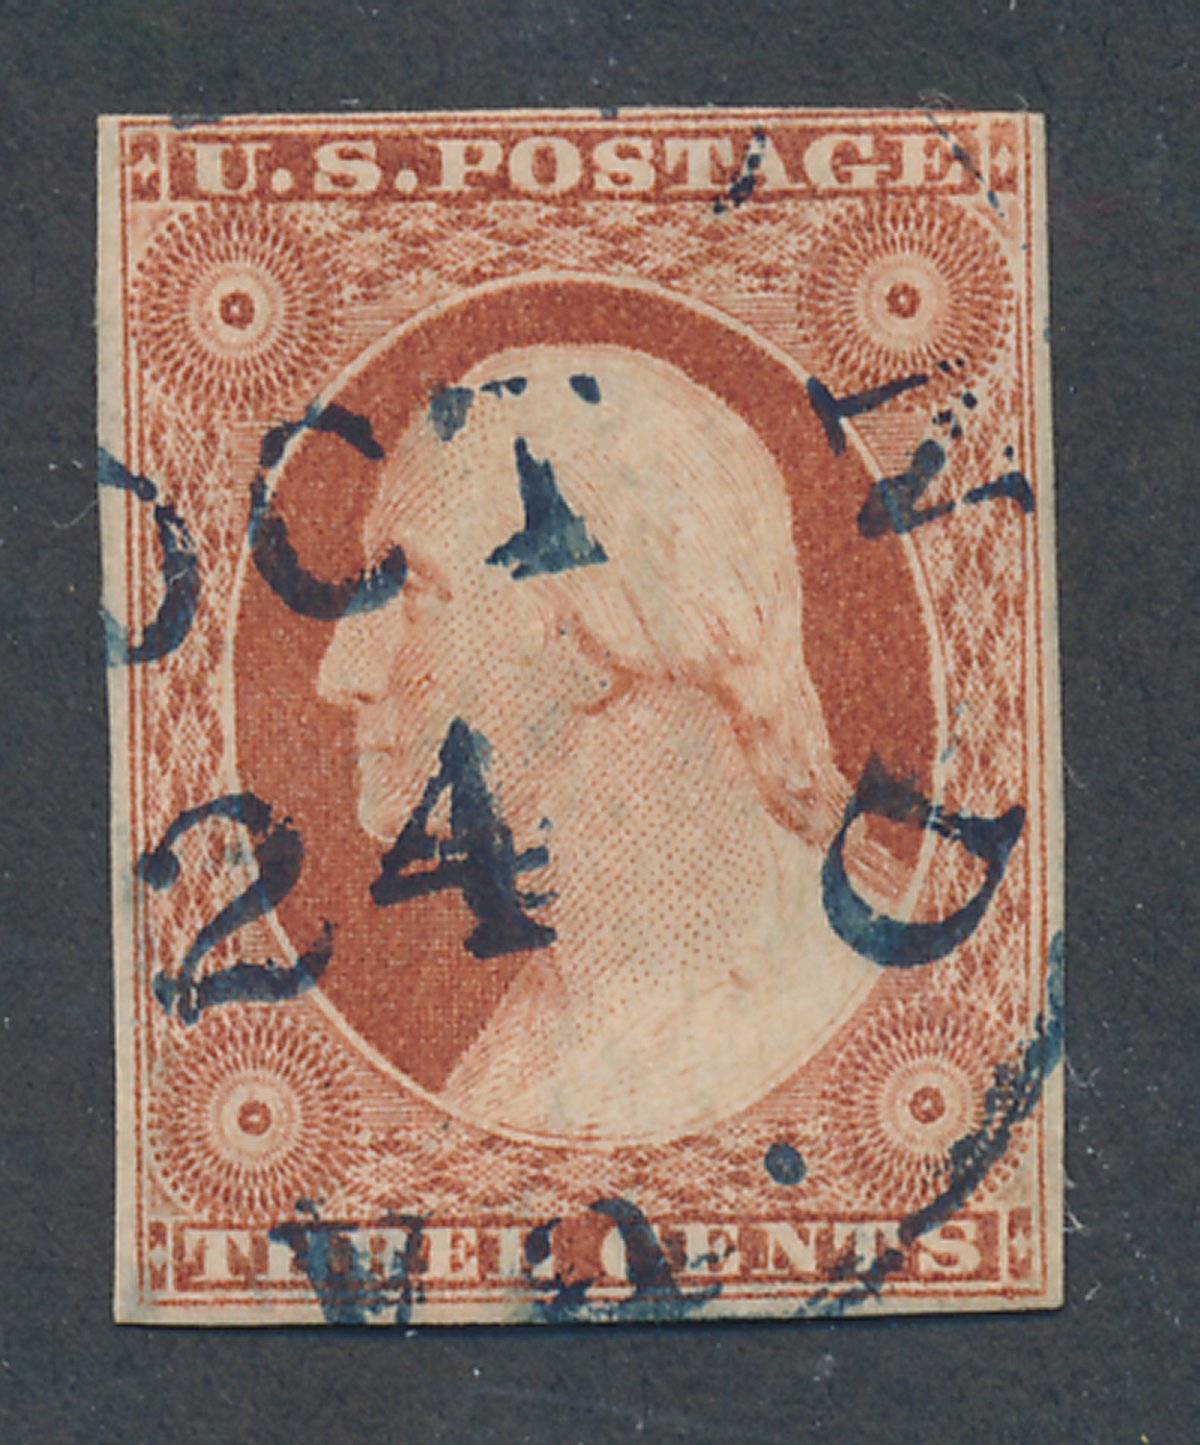 10A 3c Washington, orange brown, Type I Imperforate Used Minor Defects #10ausedmd